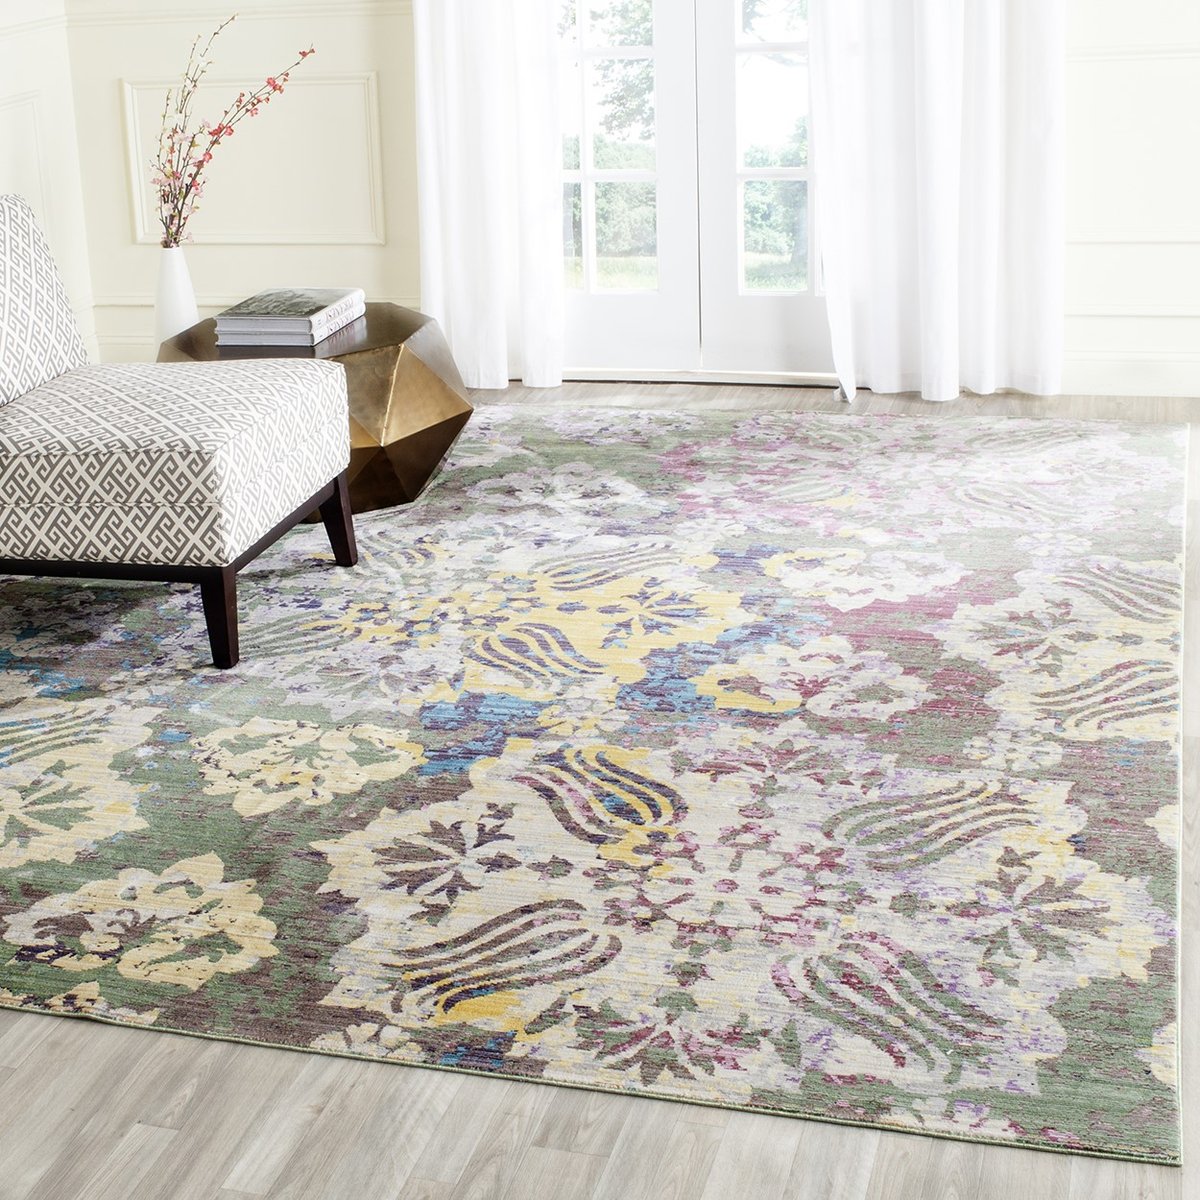 Safavieh Valencia Val 215 Rugs, How To Use A 5×7 Rug